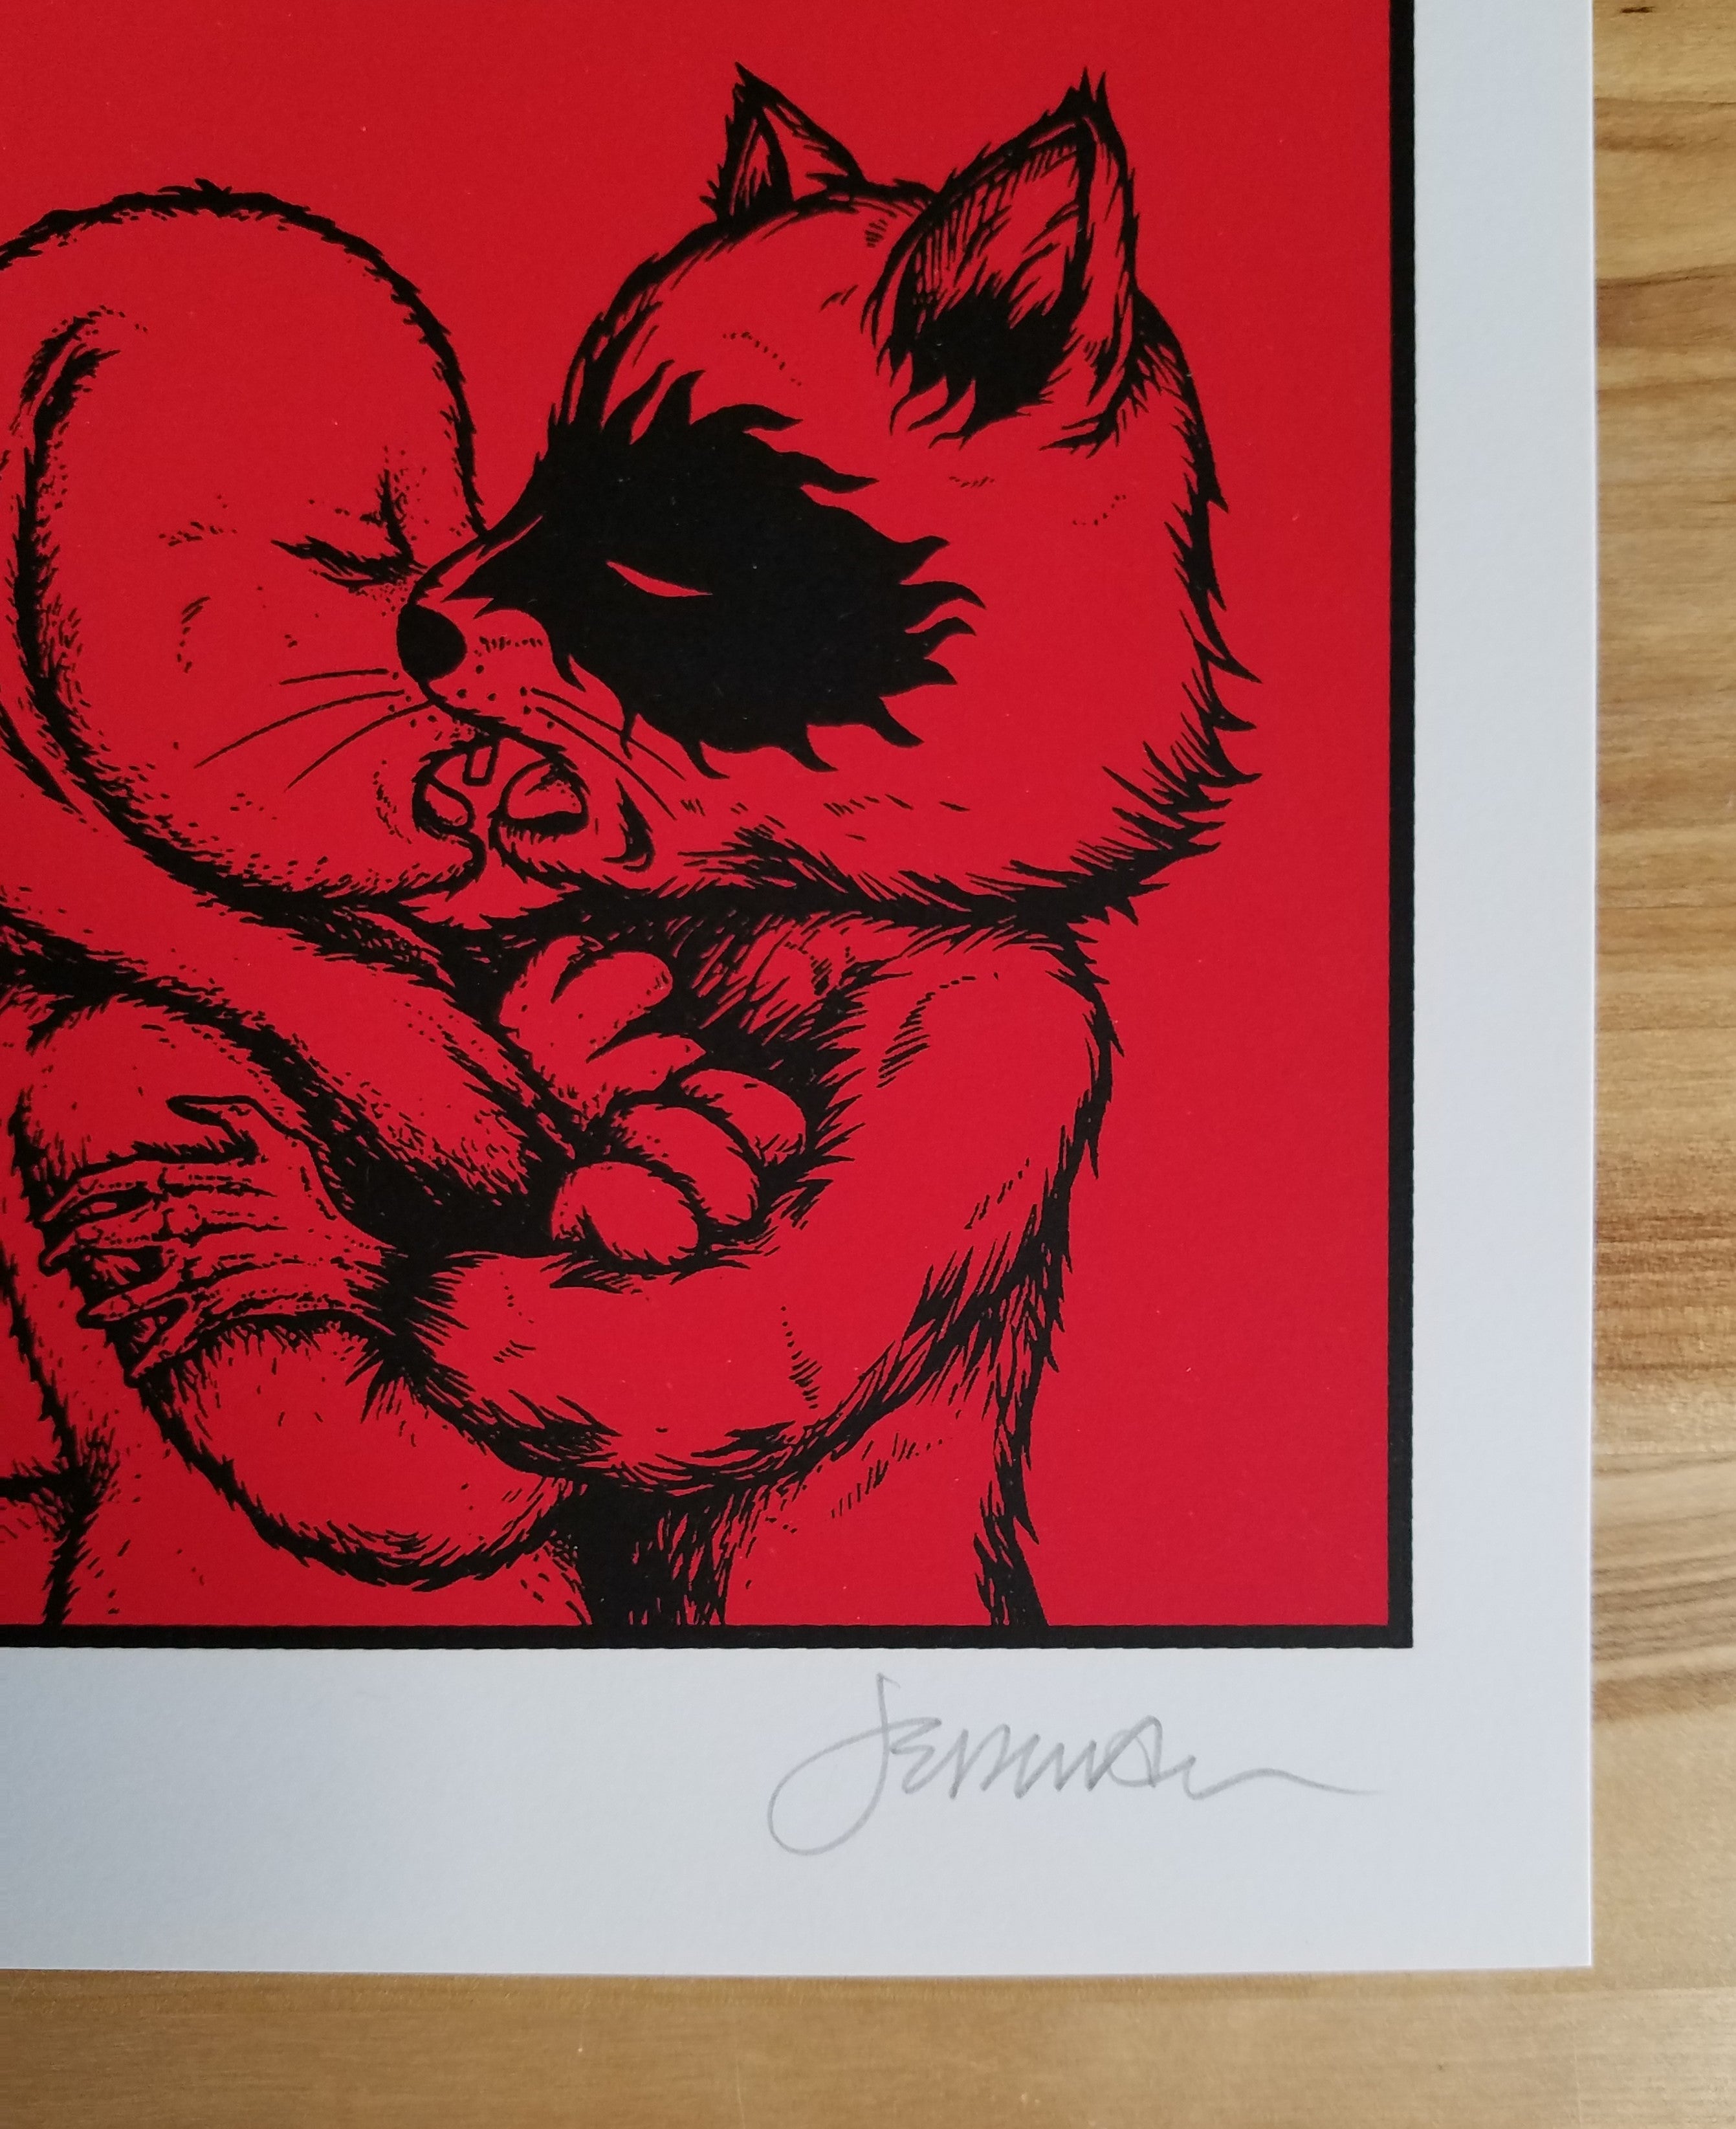 "Love Chose Me" by Jermaine Rogers. 8" x 6" screen printed on white stock.